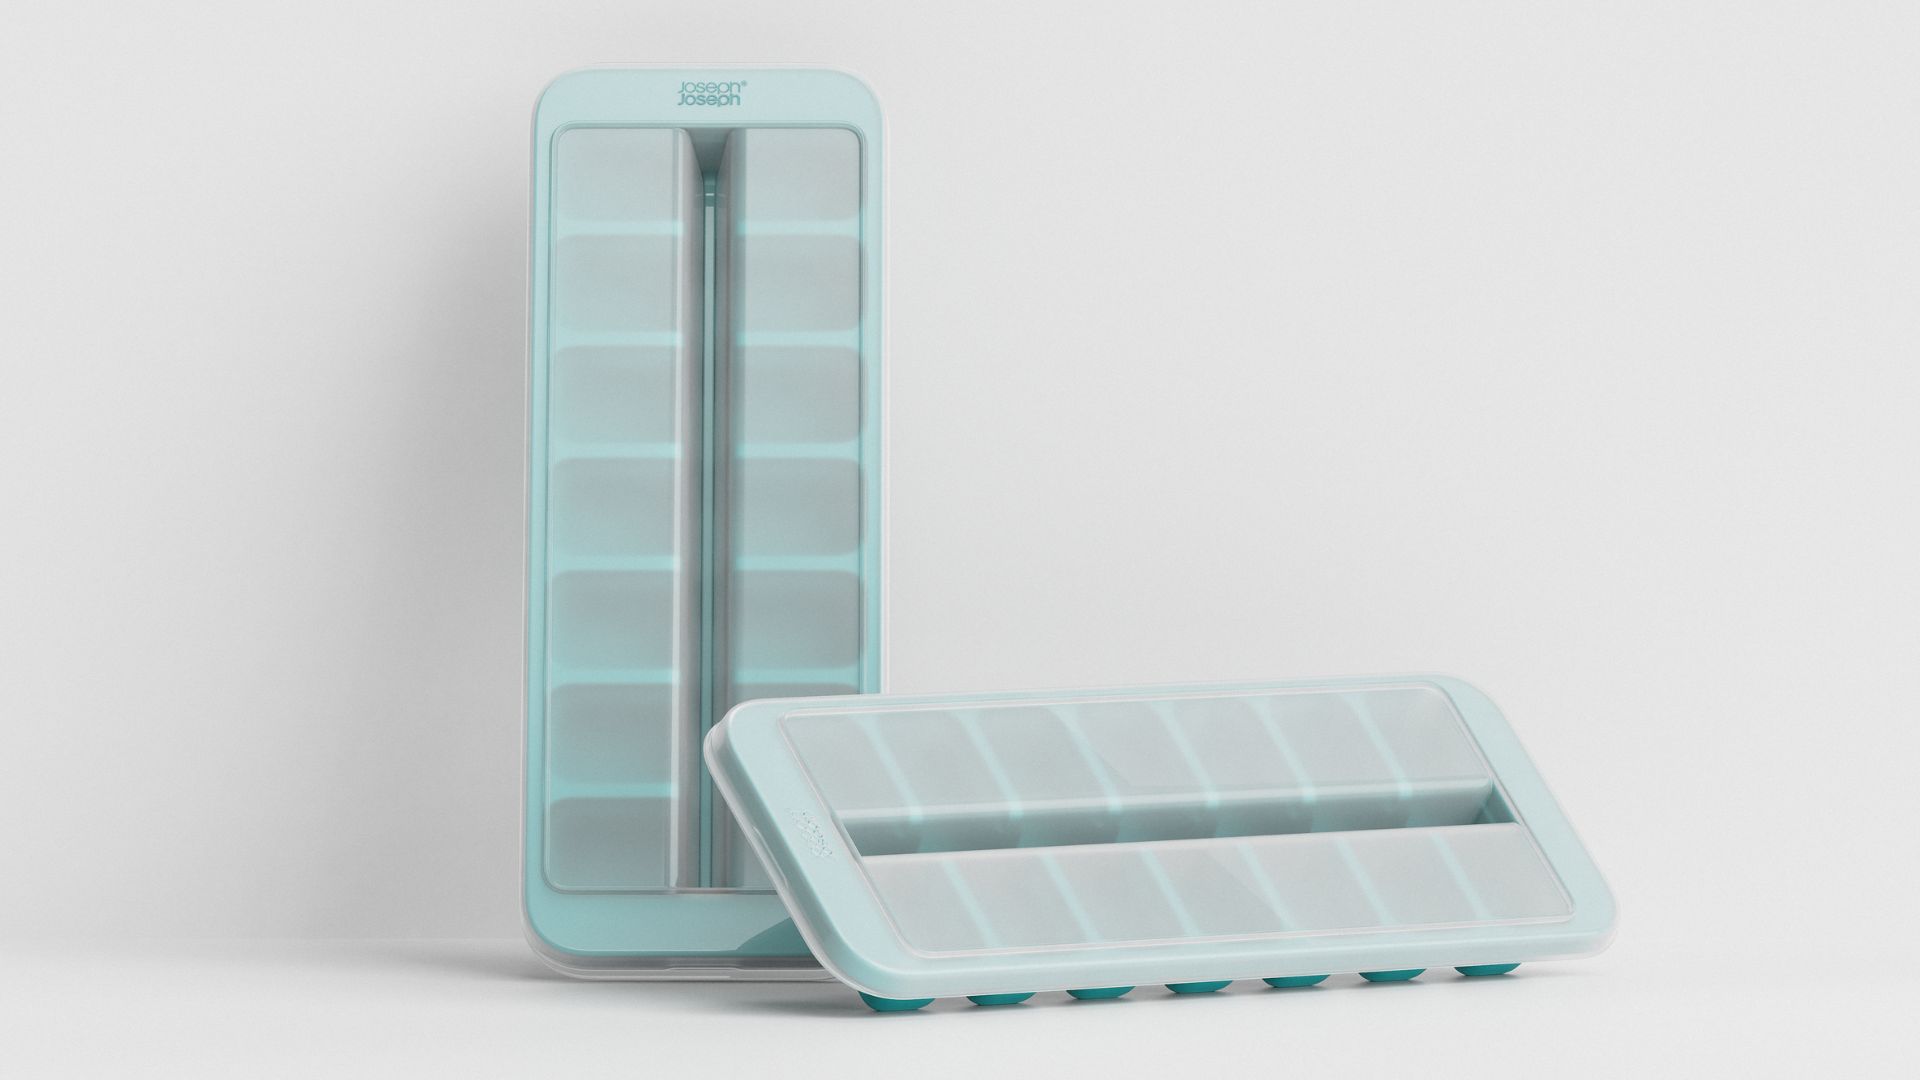 http://designwanted.com/wp-content/uploads/2023/03/Why-true-innovation-is-about-reinventing-the-ordinary-_-ice-cube-tray-by-Tone-Product-Design-cover.jpg